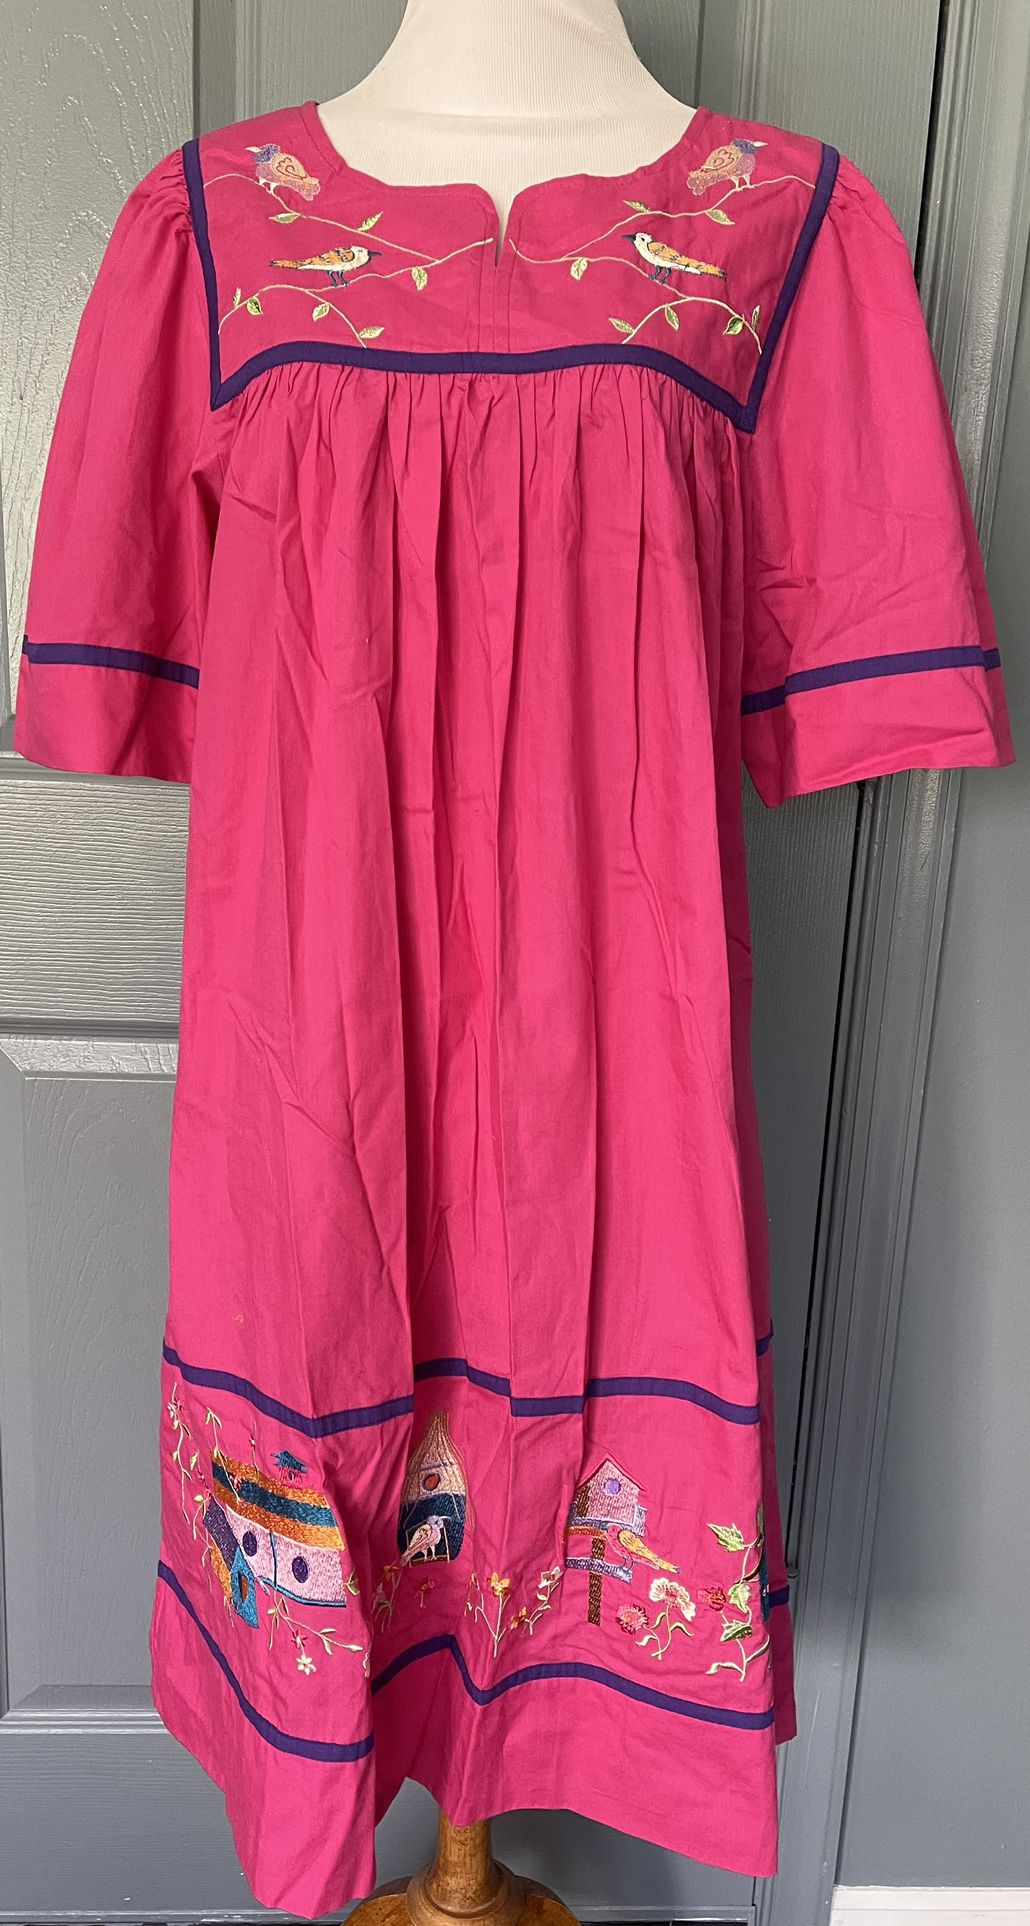 GO SOFTLY PATIO 100%Cotton Hot Pink Birds /Bird Nest Embroidered House Dress.